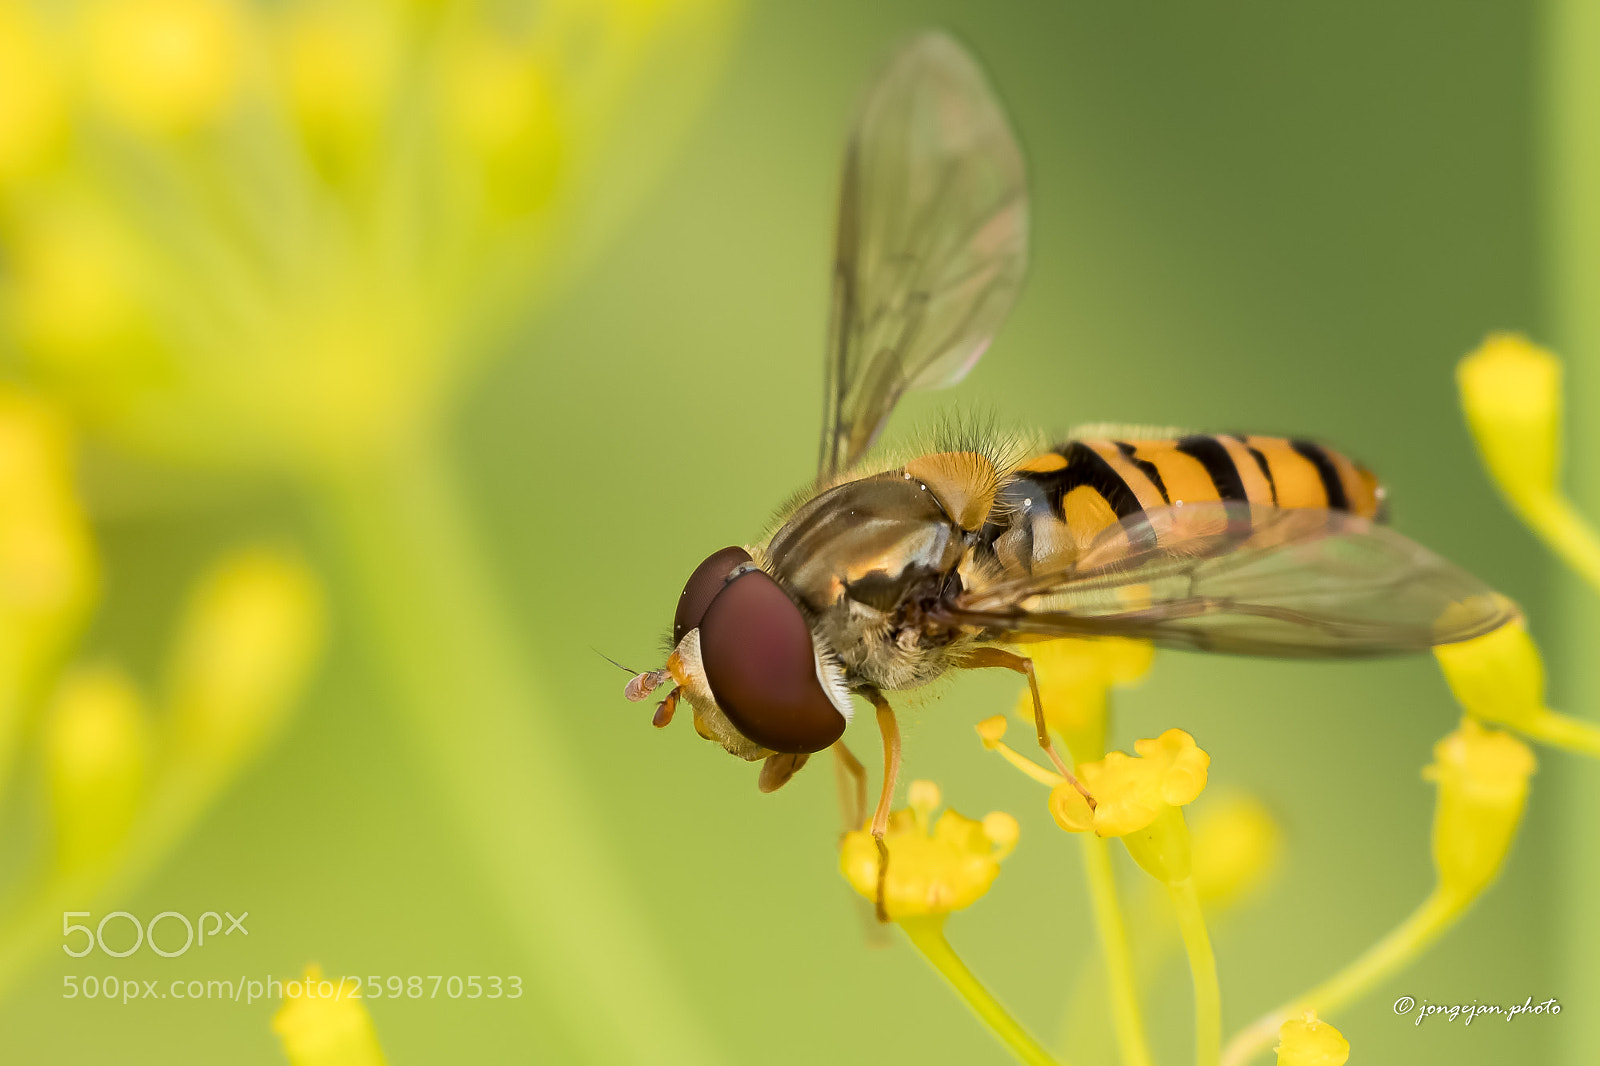 Pentax K-S2 sample photo. Hoverfly photography